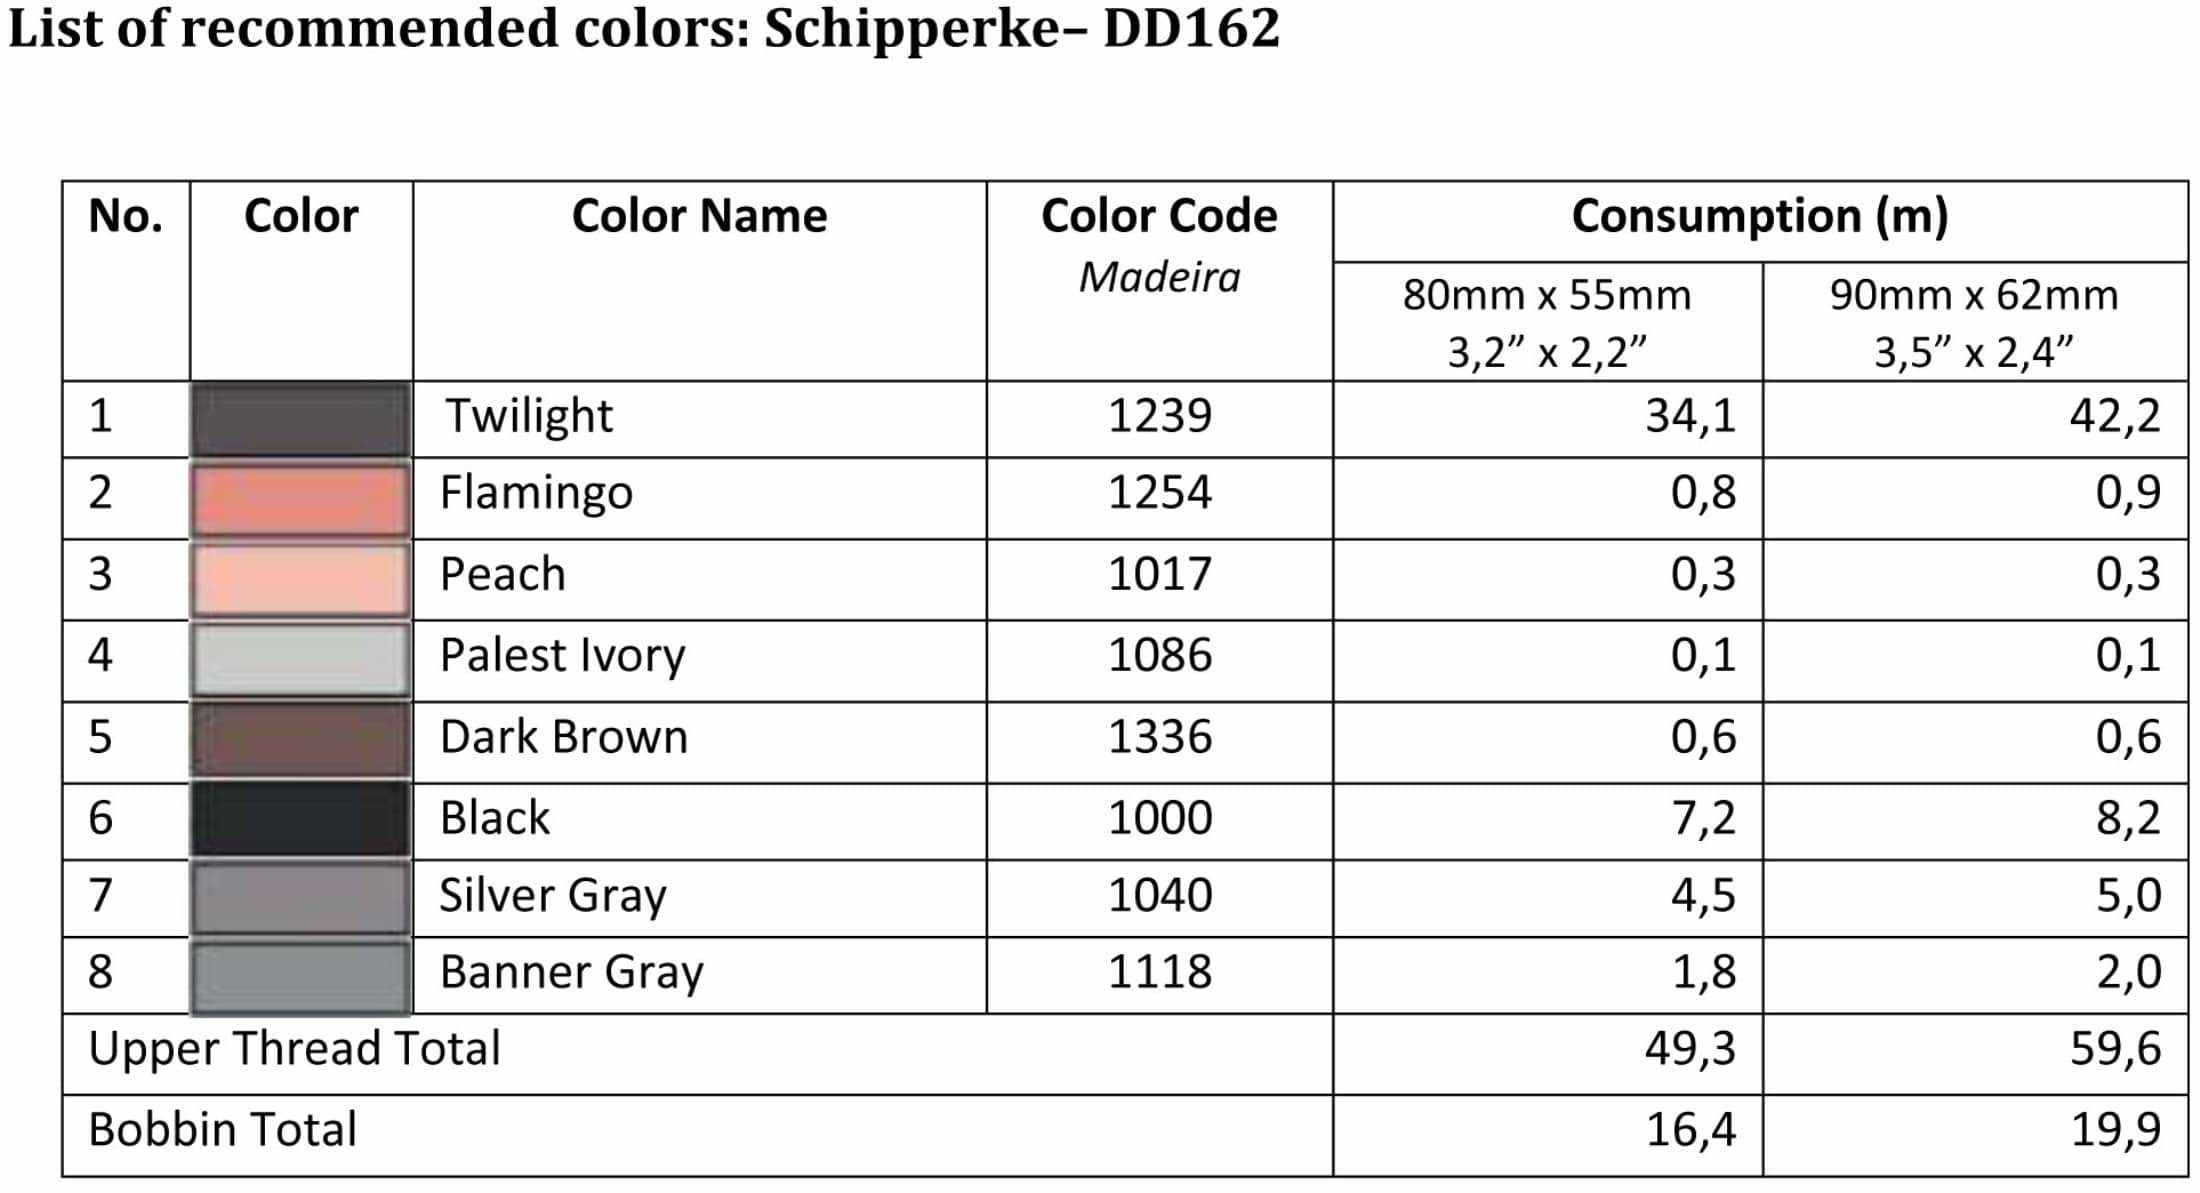 List of recommended colors - DD162